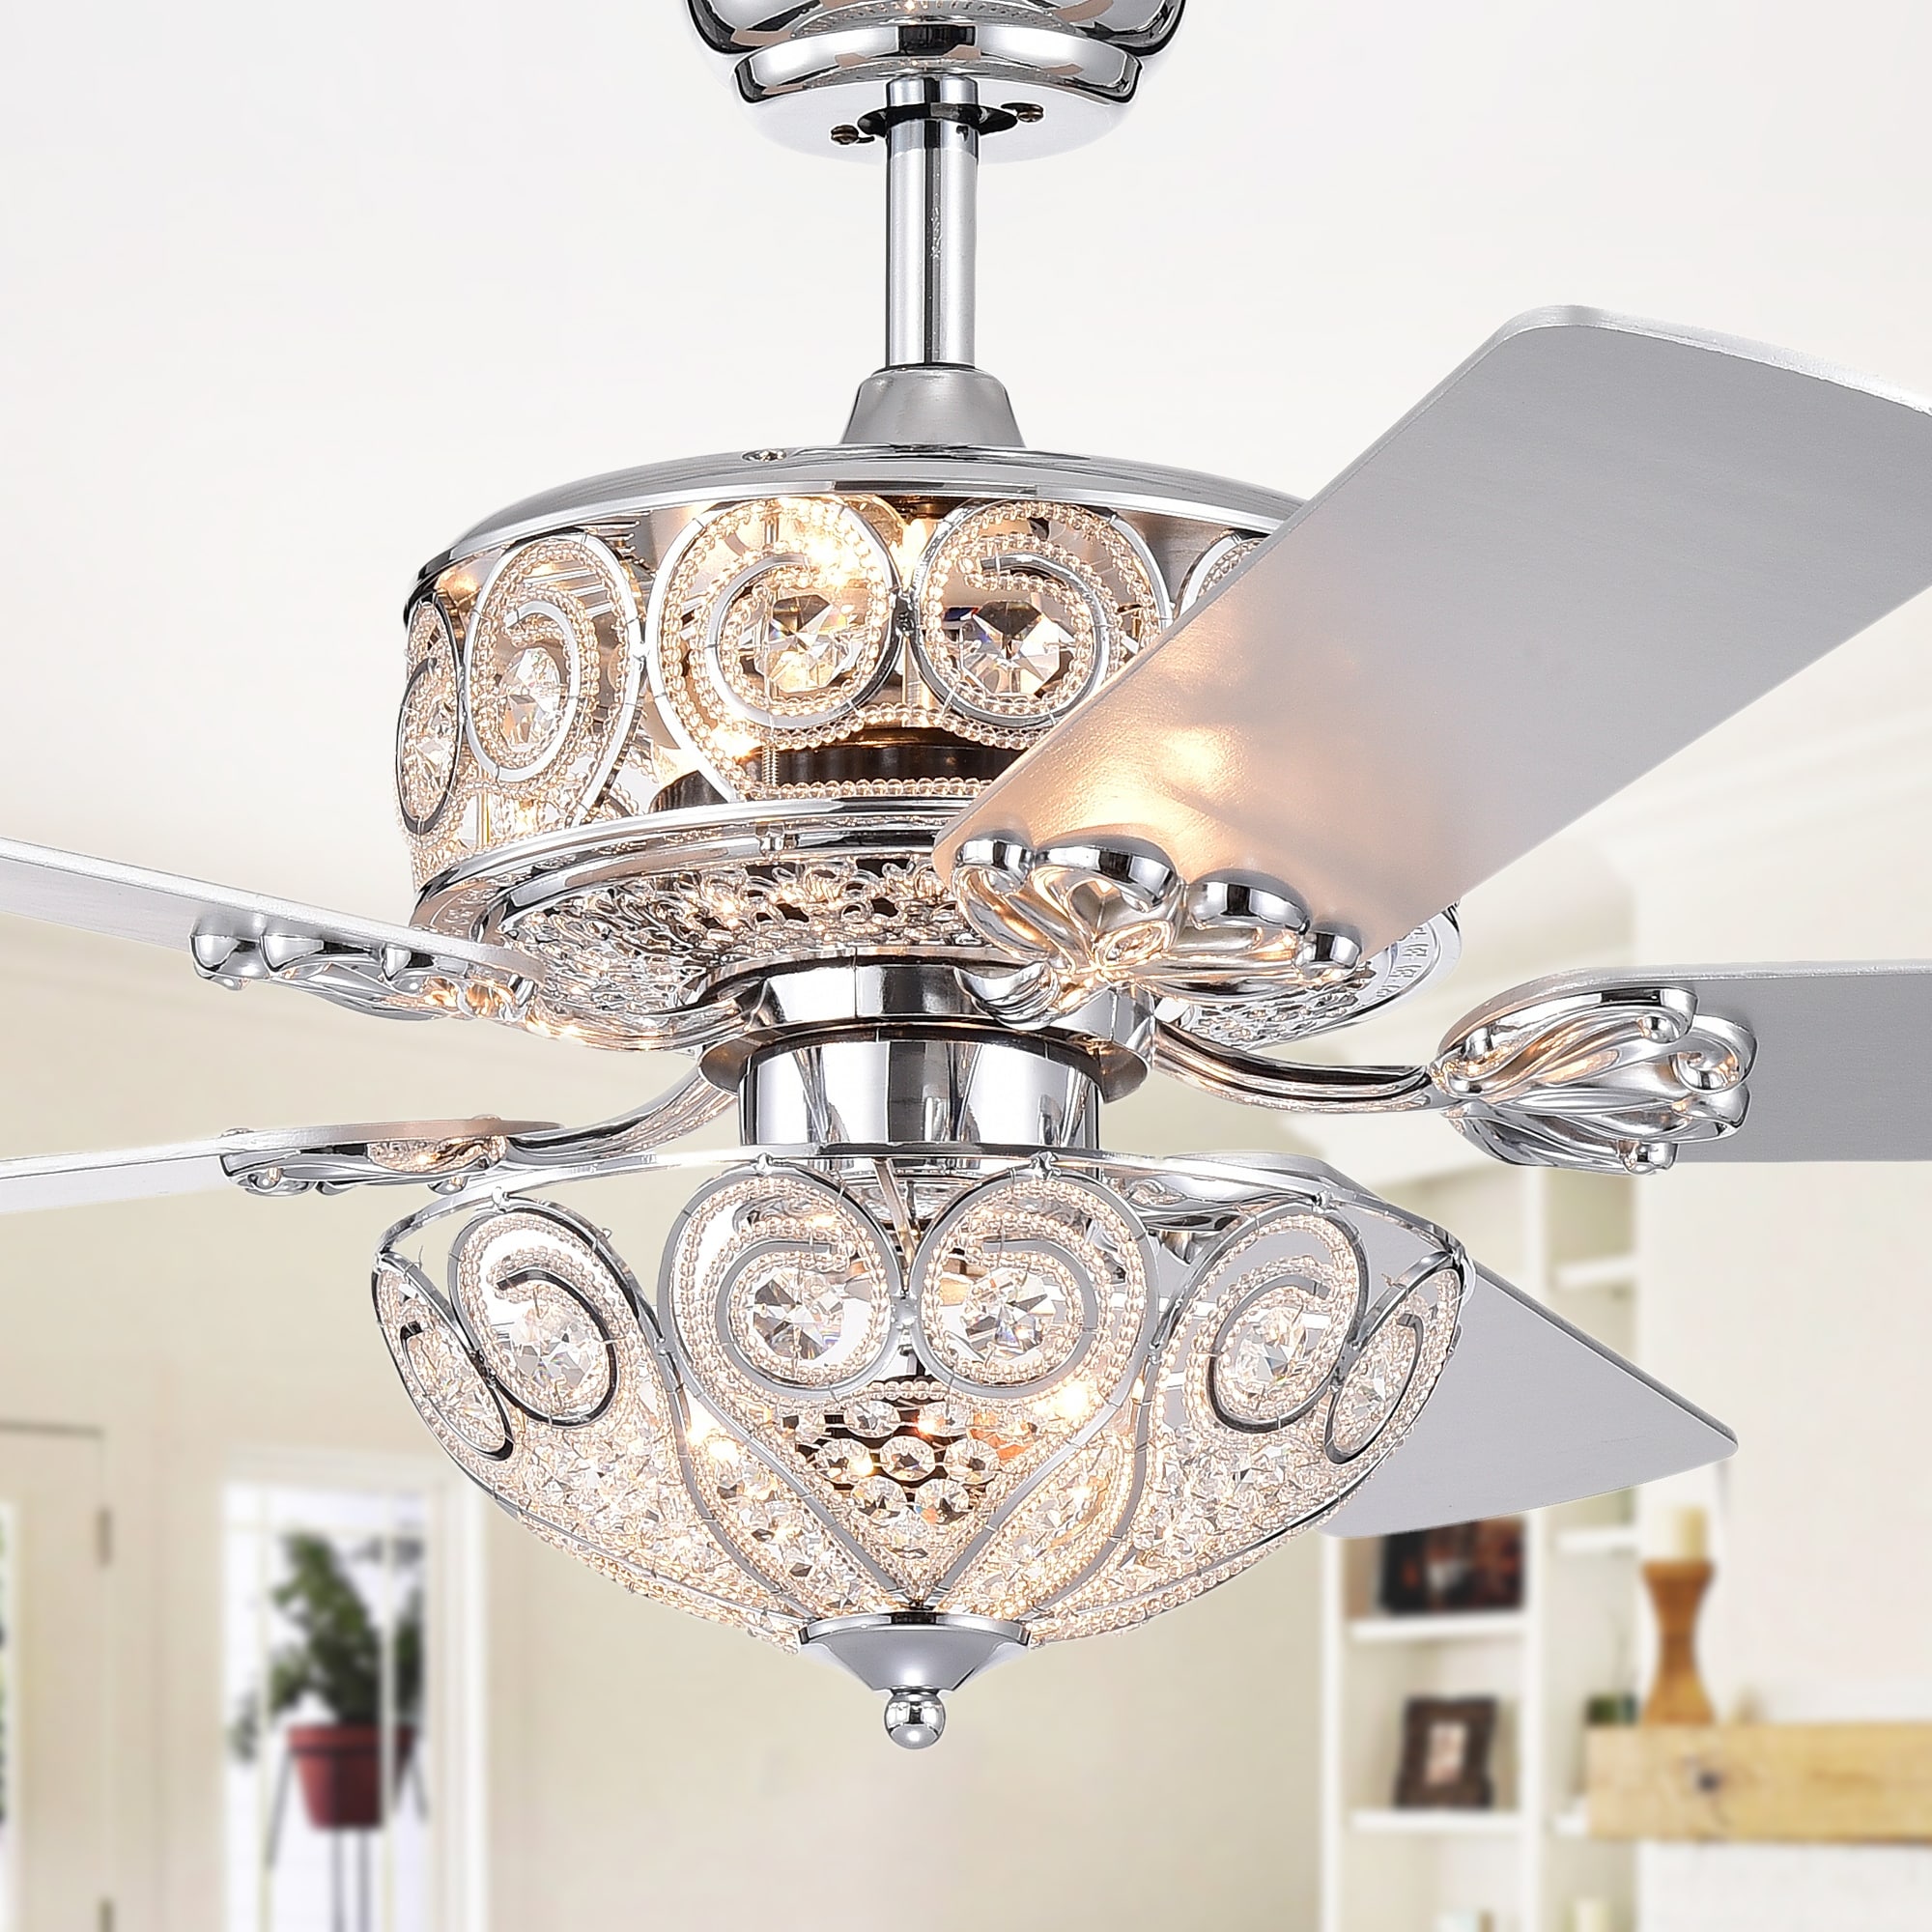 Catalina Chrome 5 Blade 52 Inch Crystal Ceiling Fan On Sale Overstock 26386812